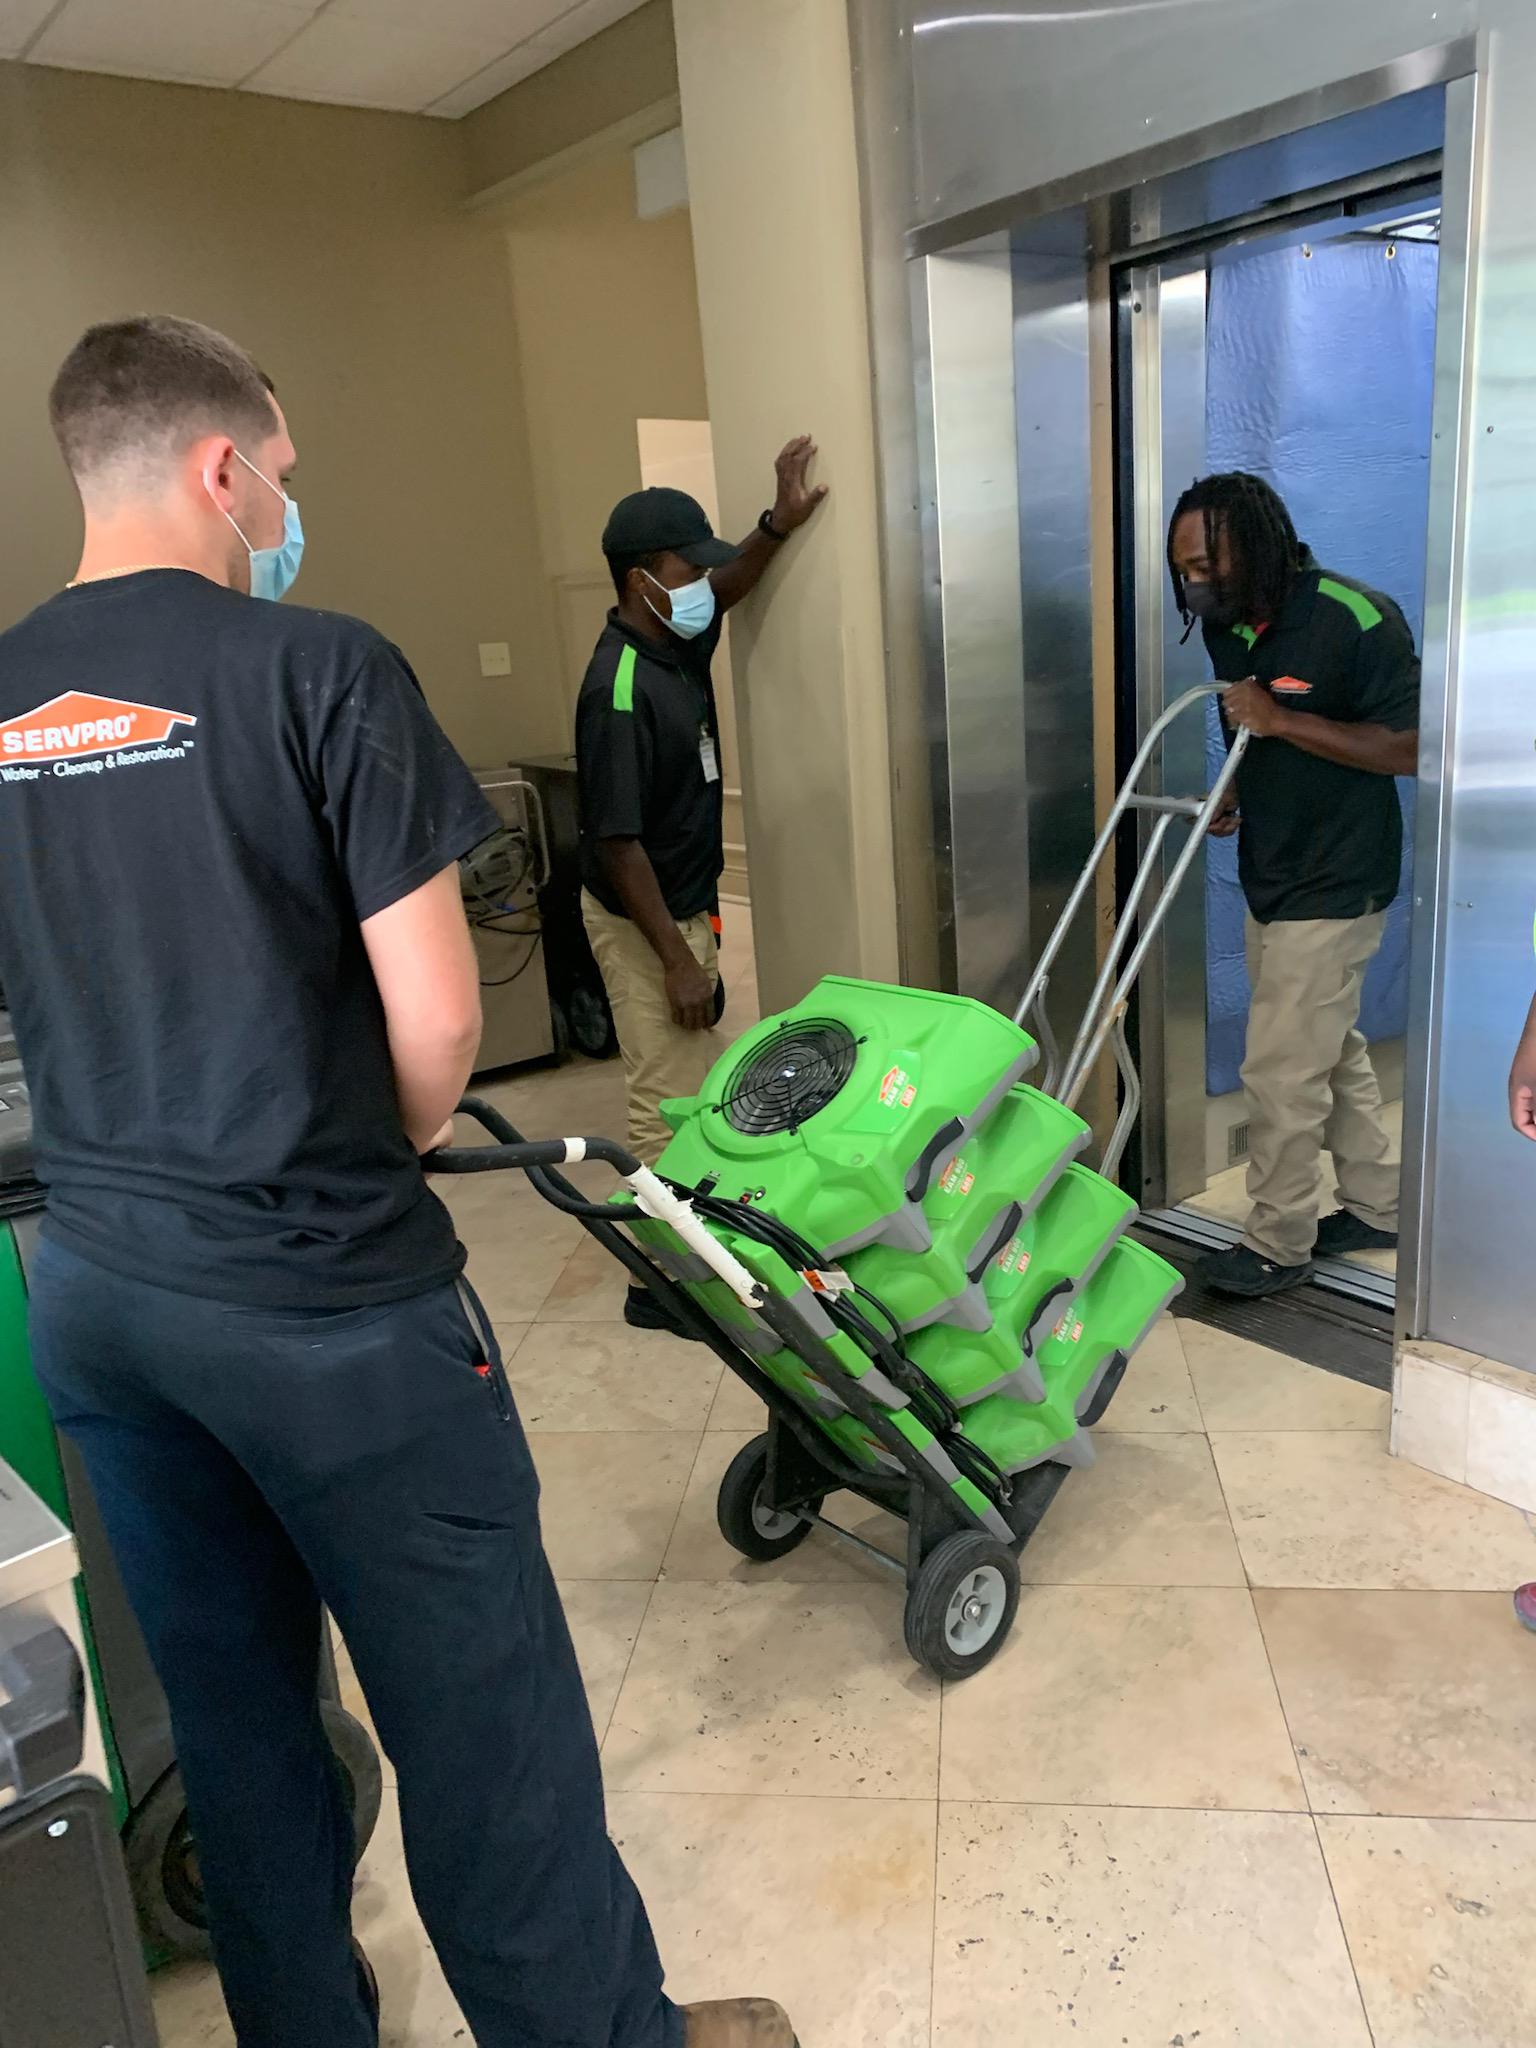 SERVPRO crew bringing floor dryers to the flooded building.